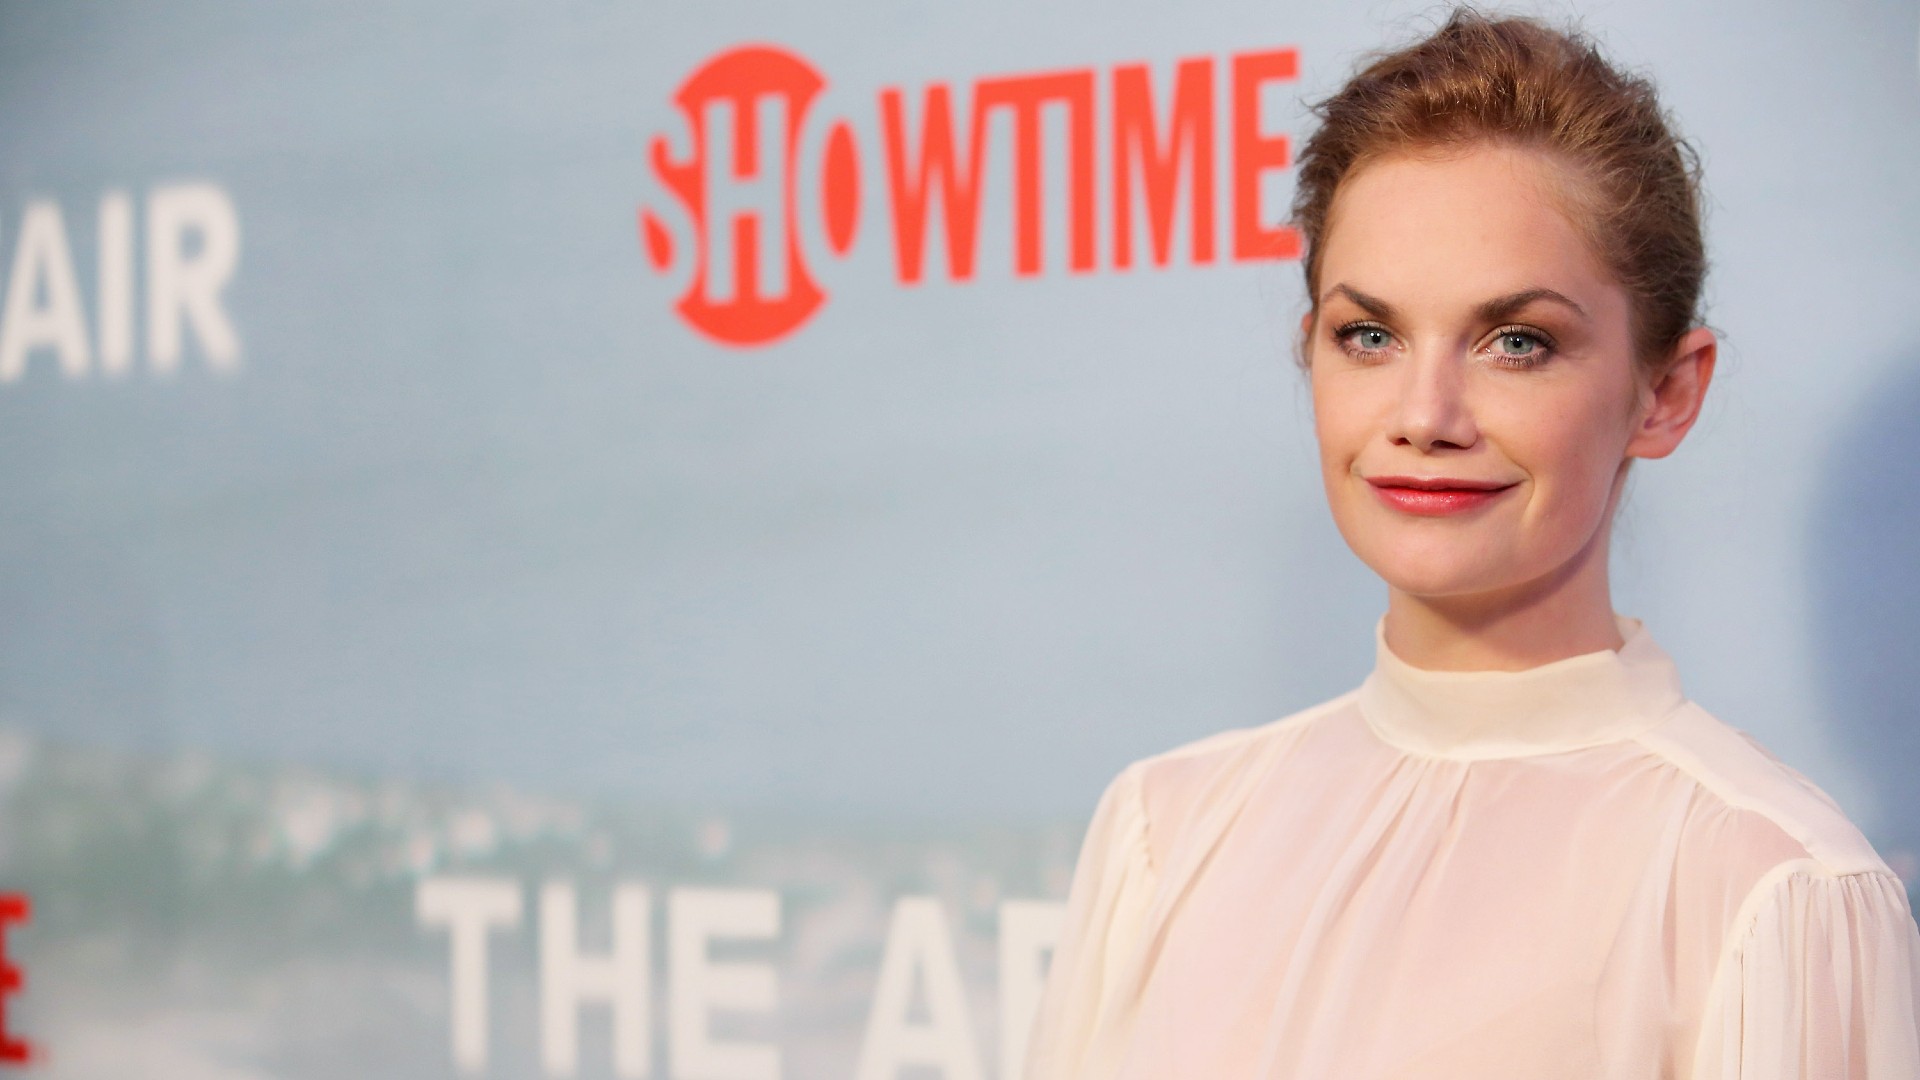 Ruth Wilson criticizes Hollywood as ‘fickle’ and lacking moral principles.